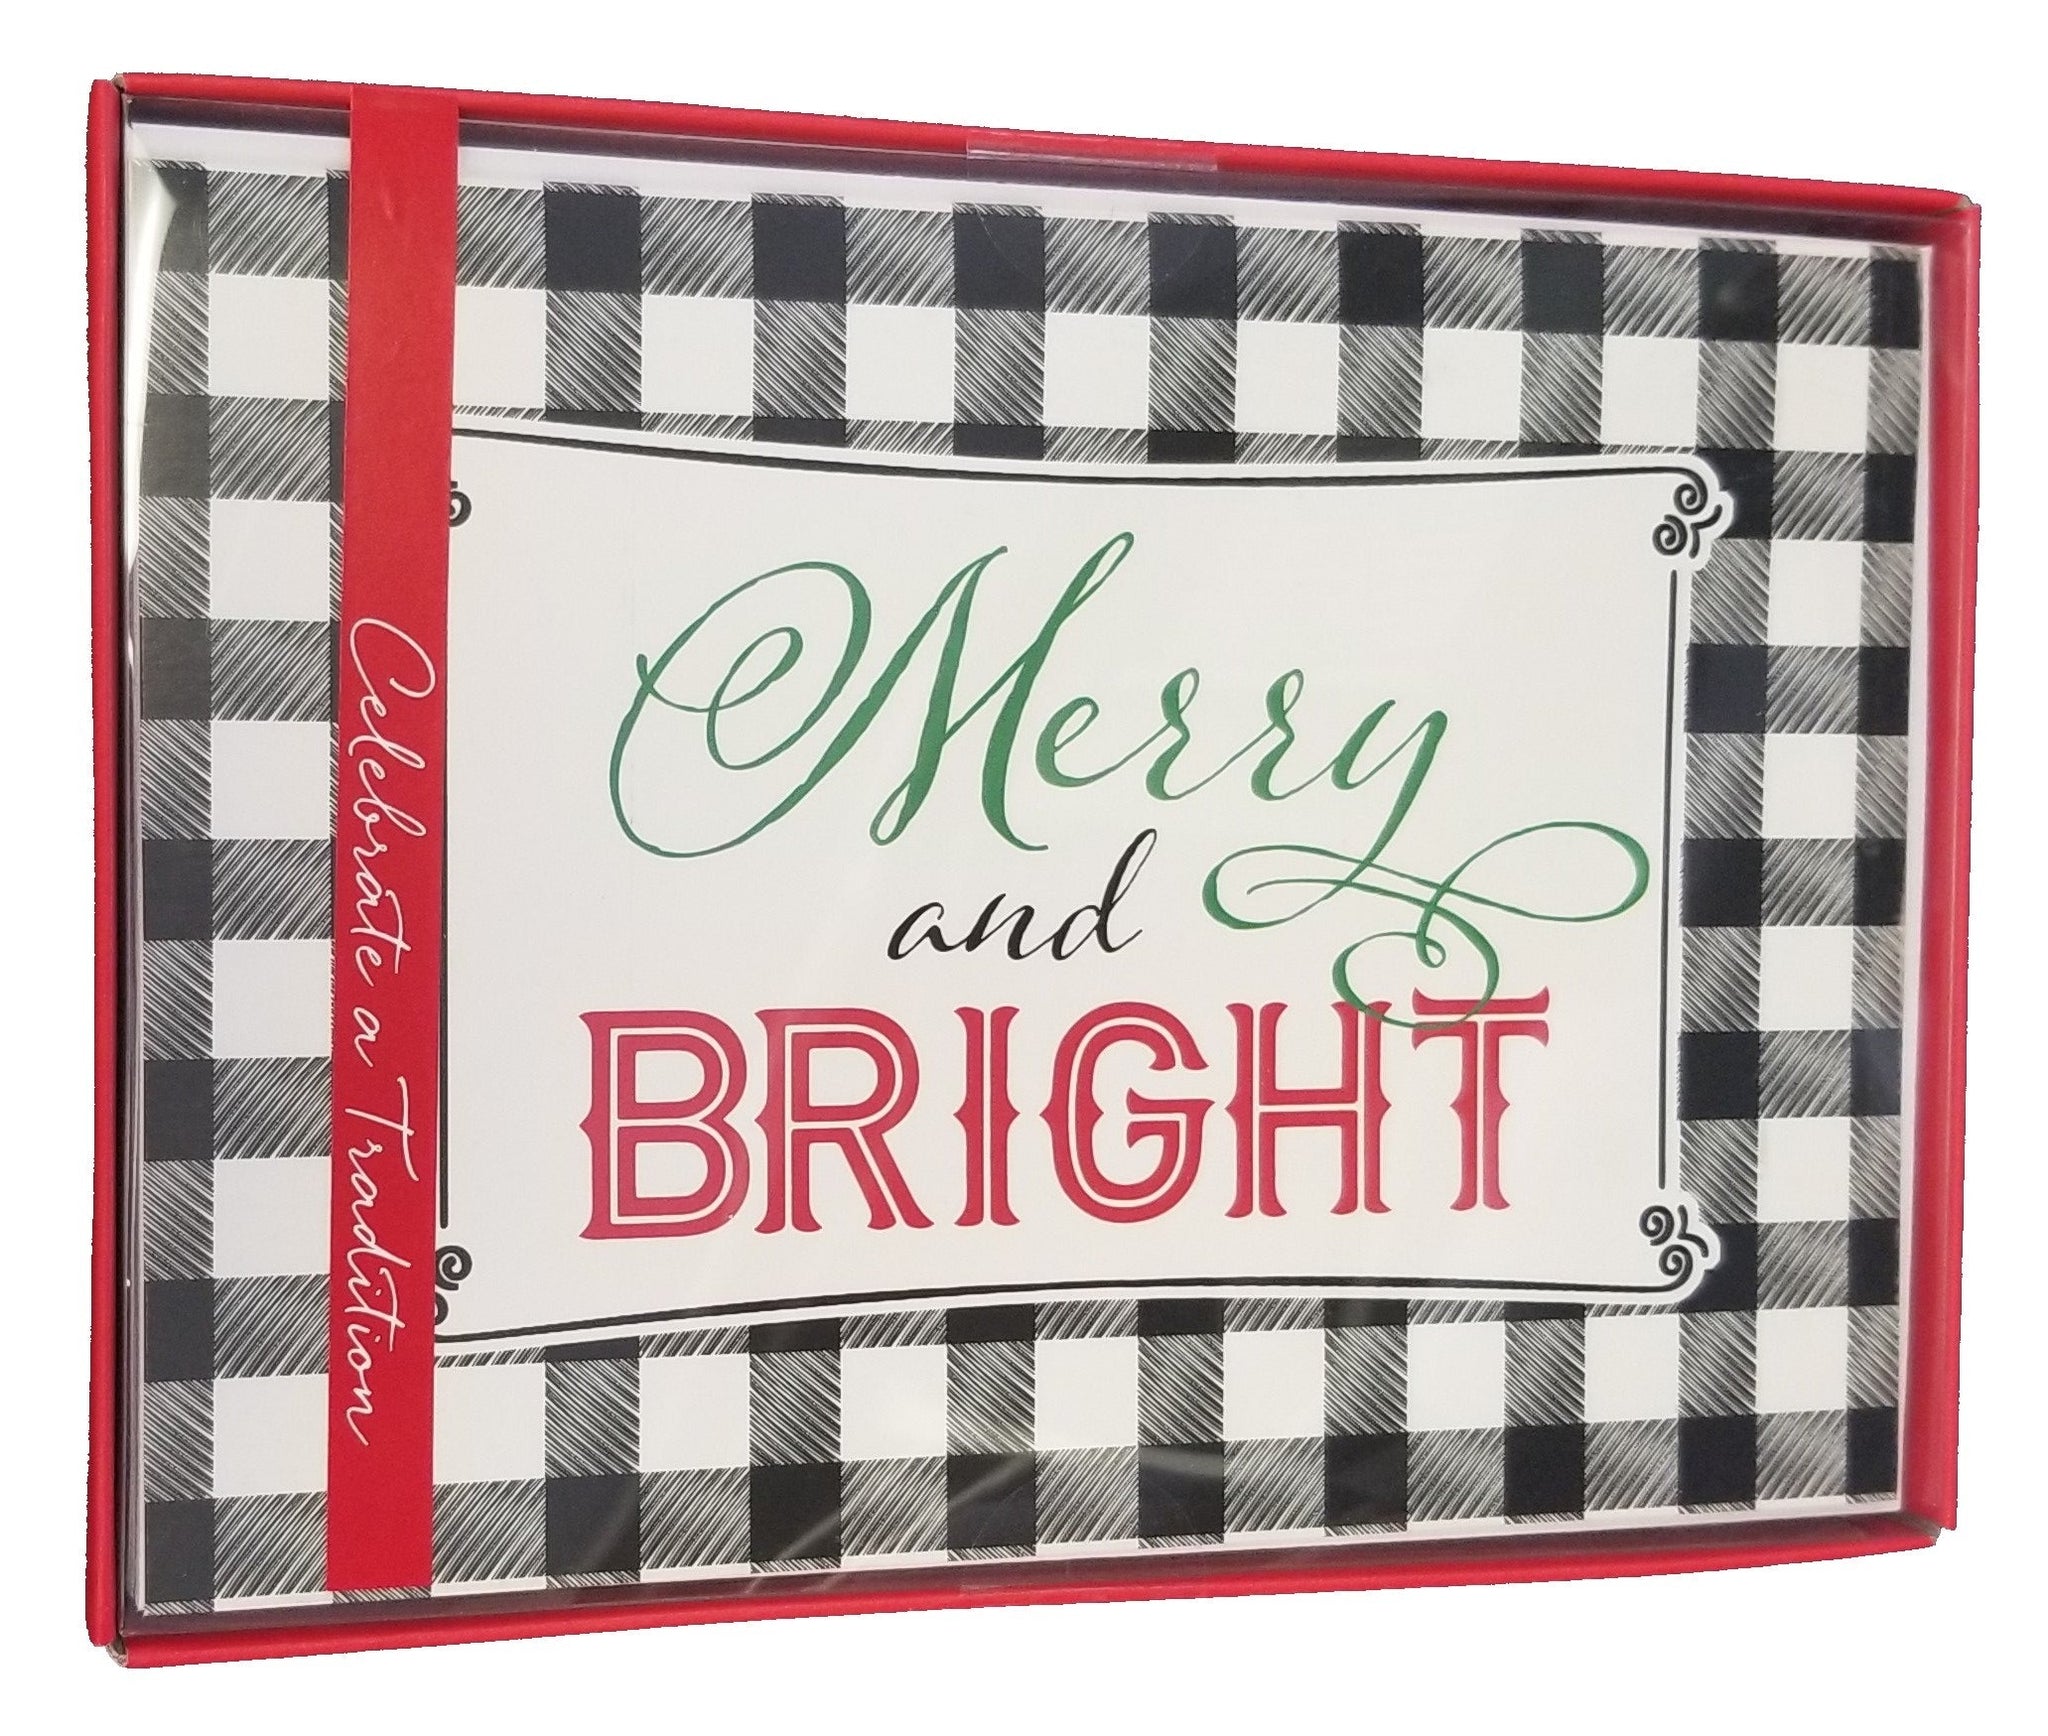 Merry and Bright Buffalo Plaid -  Premium Boxed Holiday Cards - 18ct.